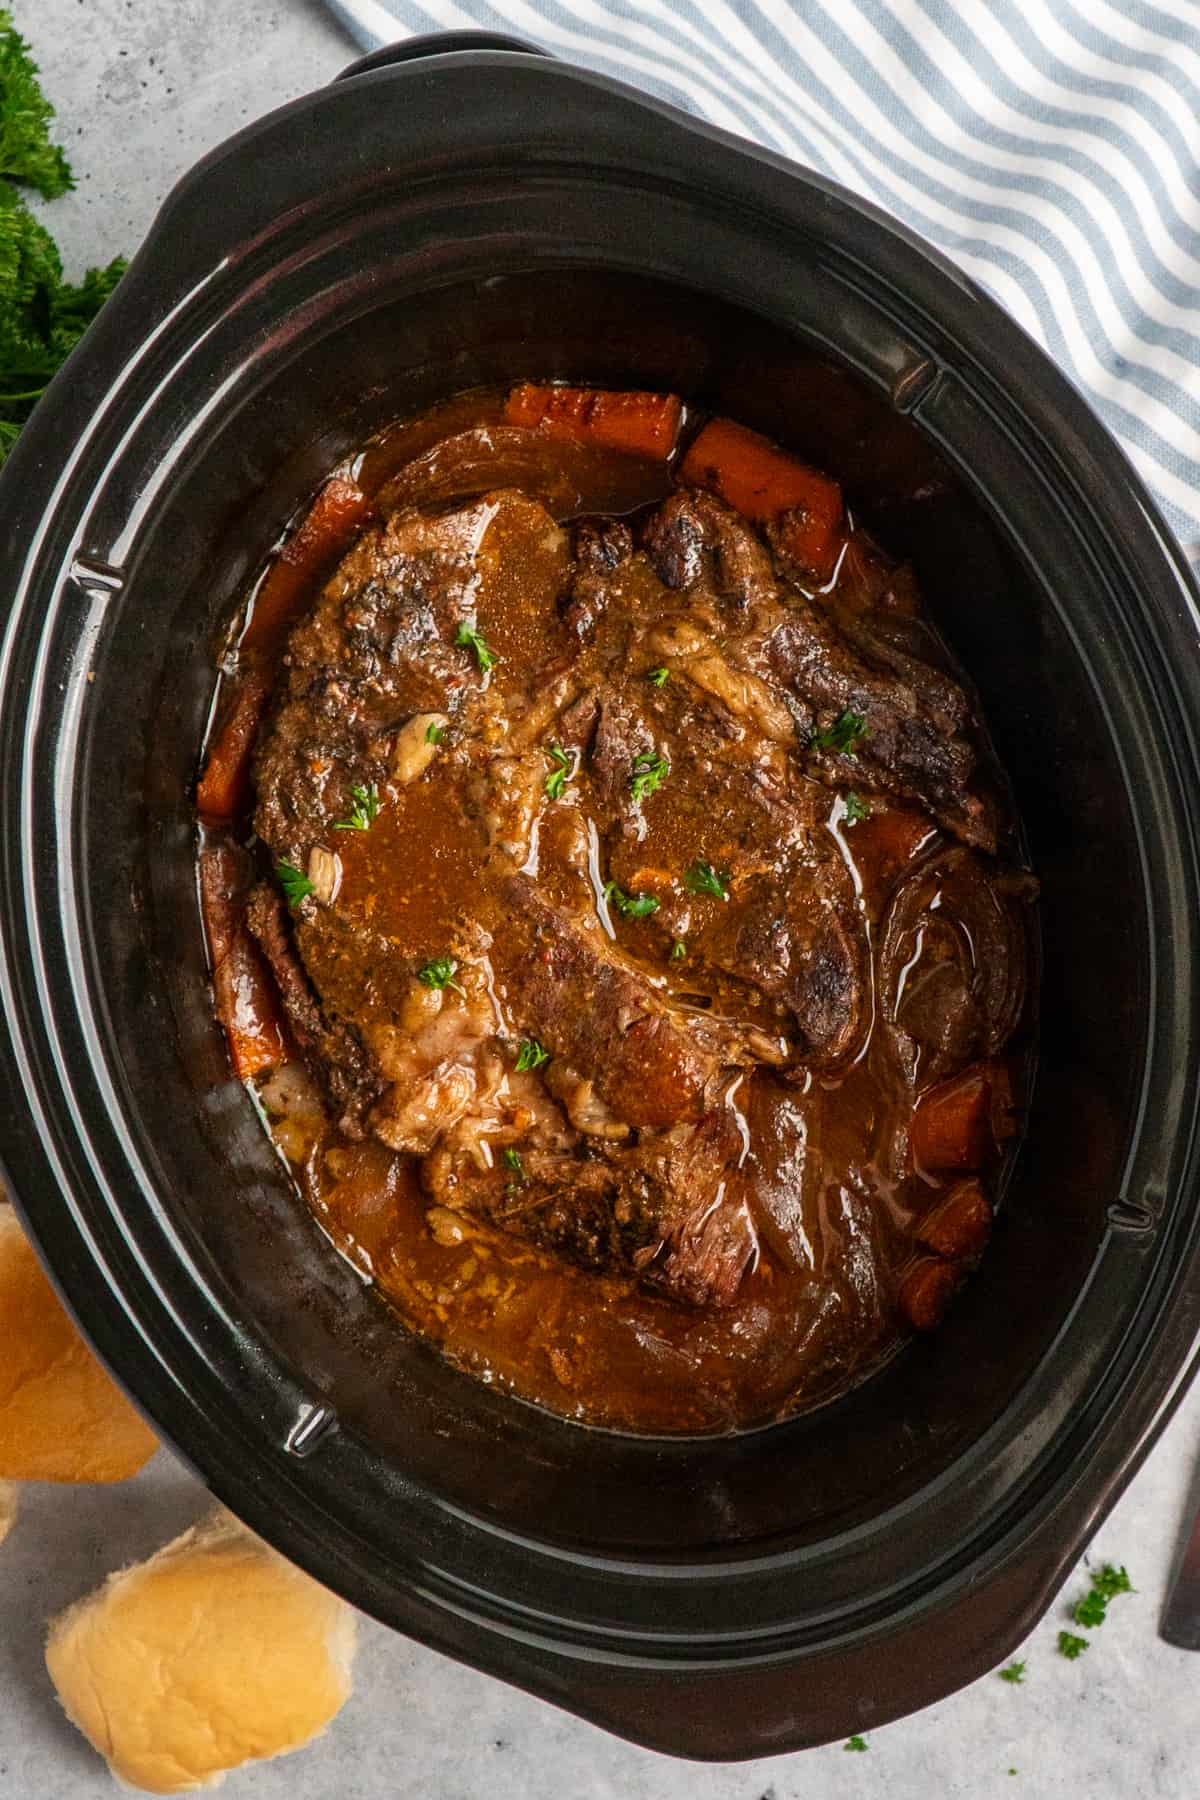 Overhead look at a pot roast in a slow cooker.